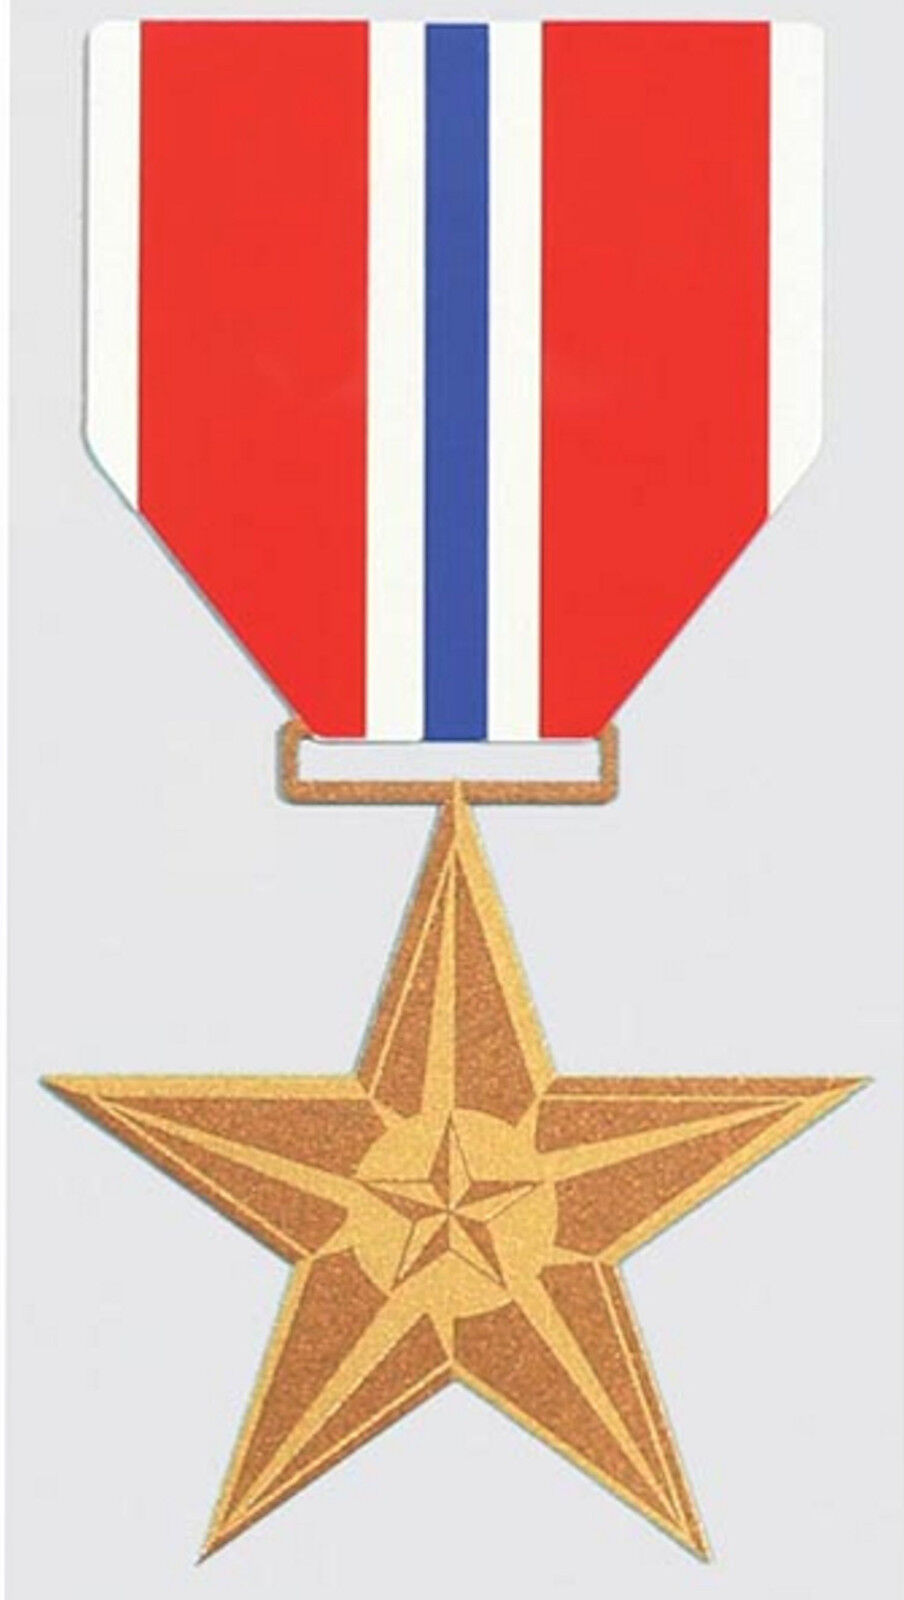 BRONZE STAR MEDAL STICKER - DECAL - MADE IN THE USA